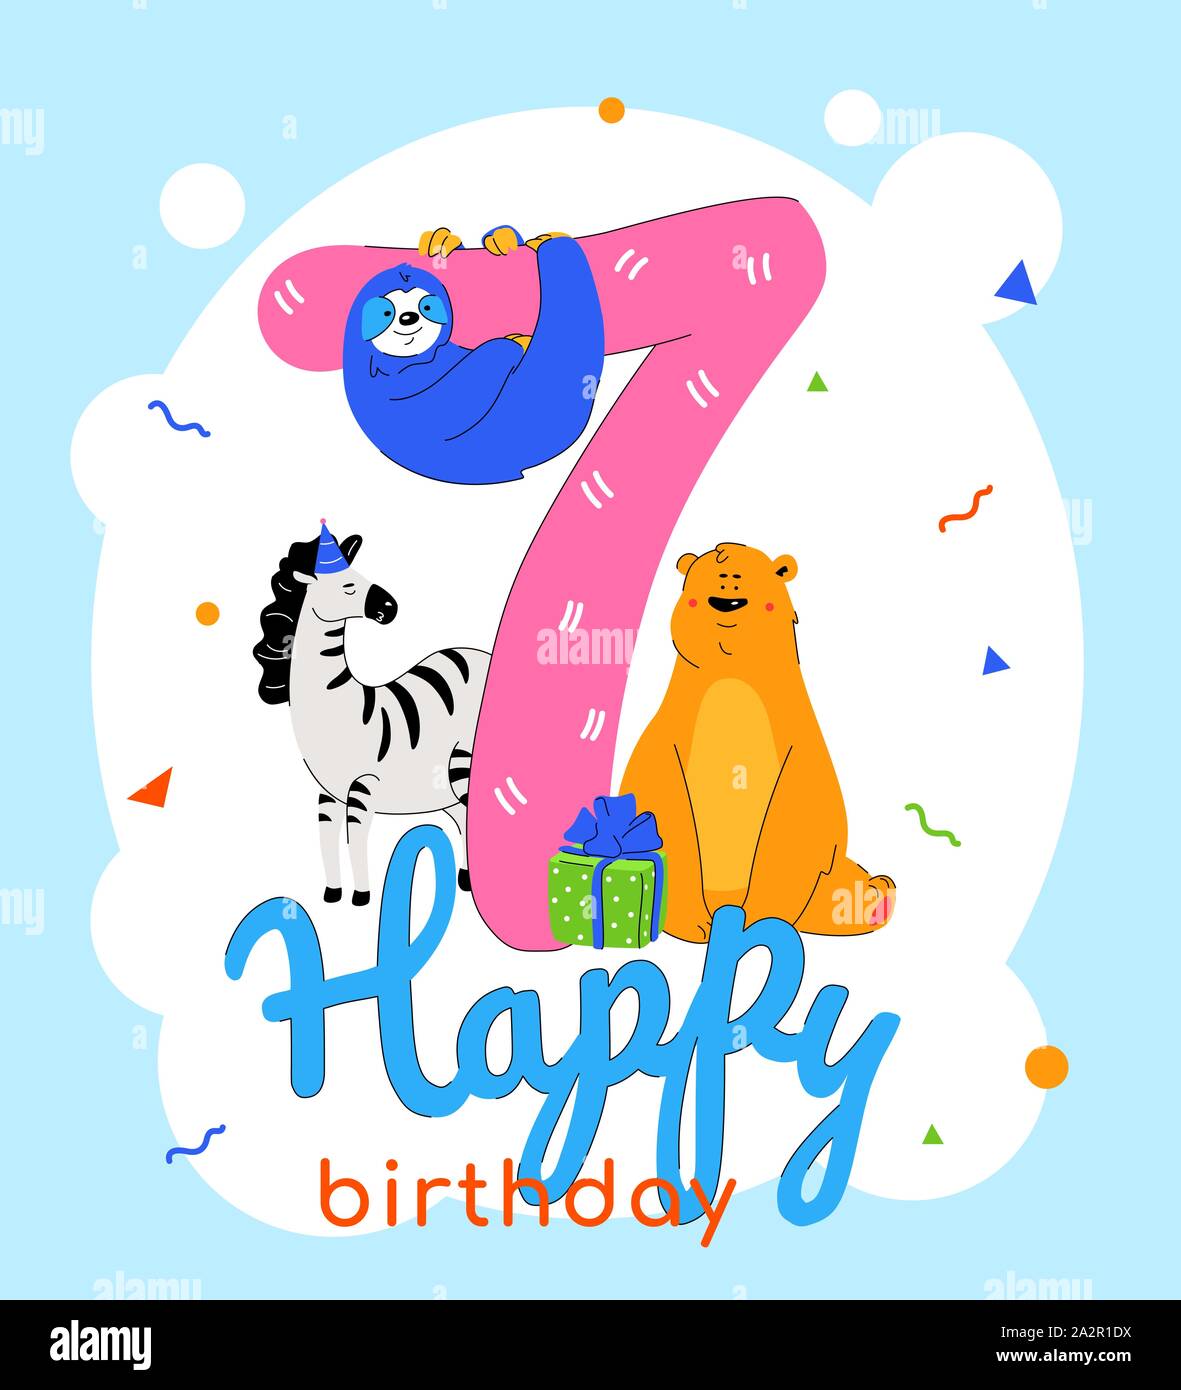 Children 7th birthday greeting card vector template Stock Vector